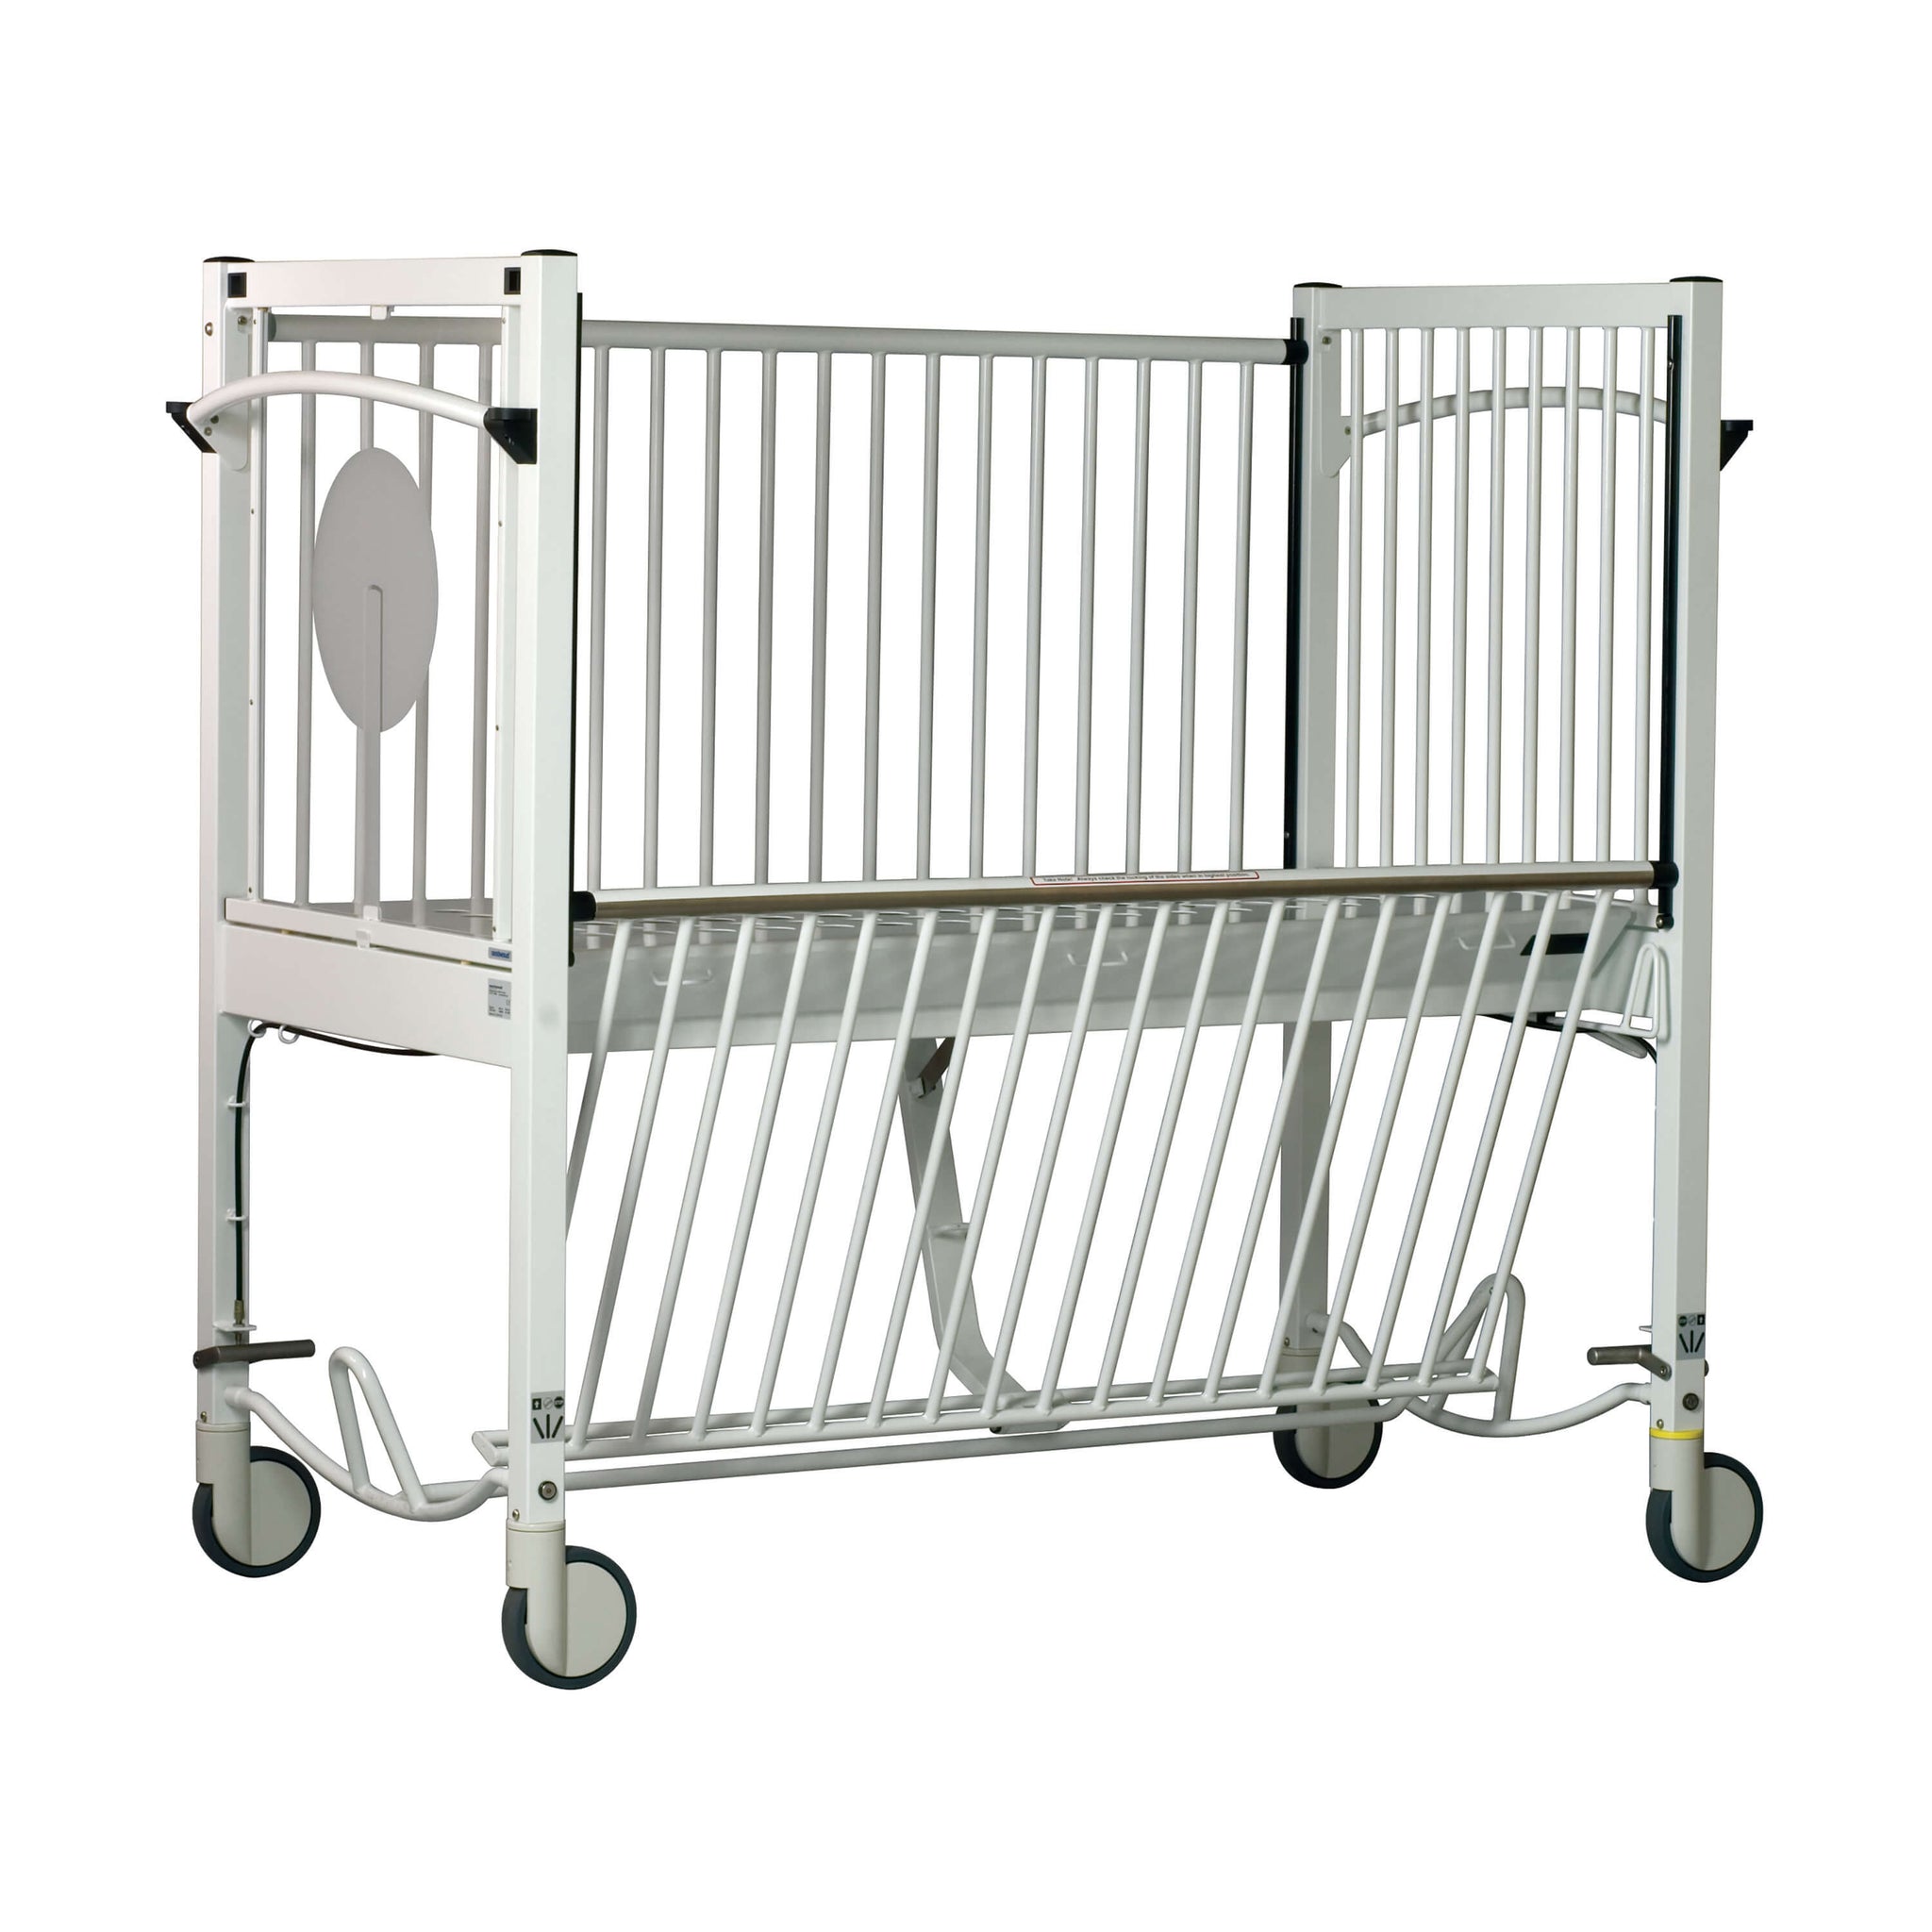 Children's Cot - Fixed Height, 800 mm High Side Cot